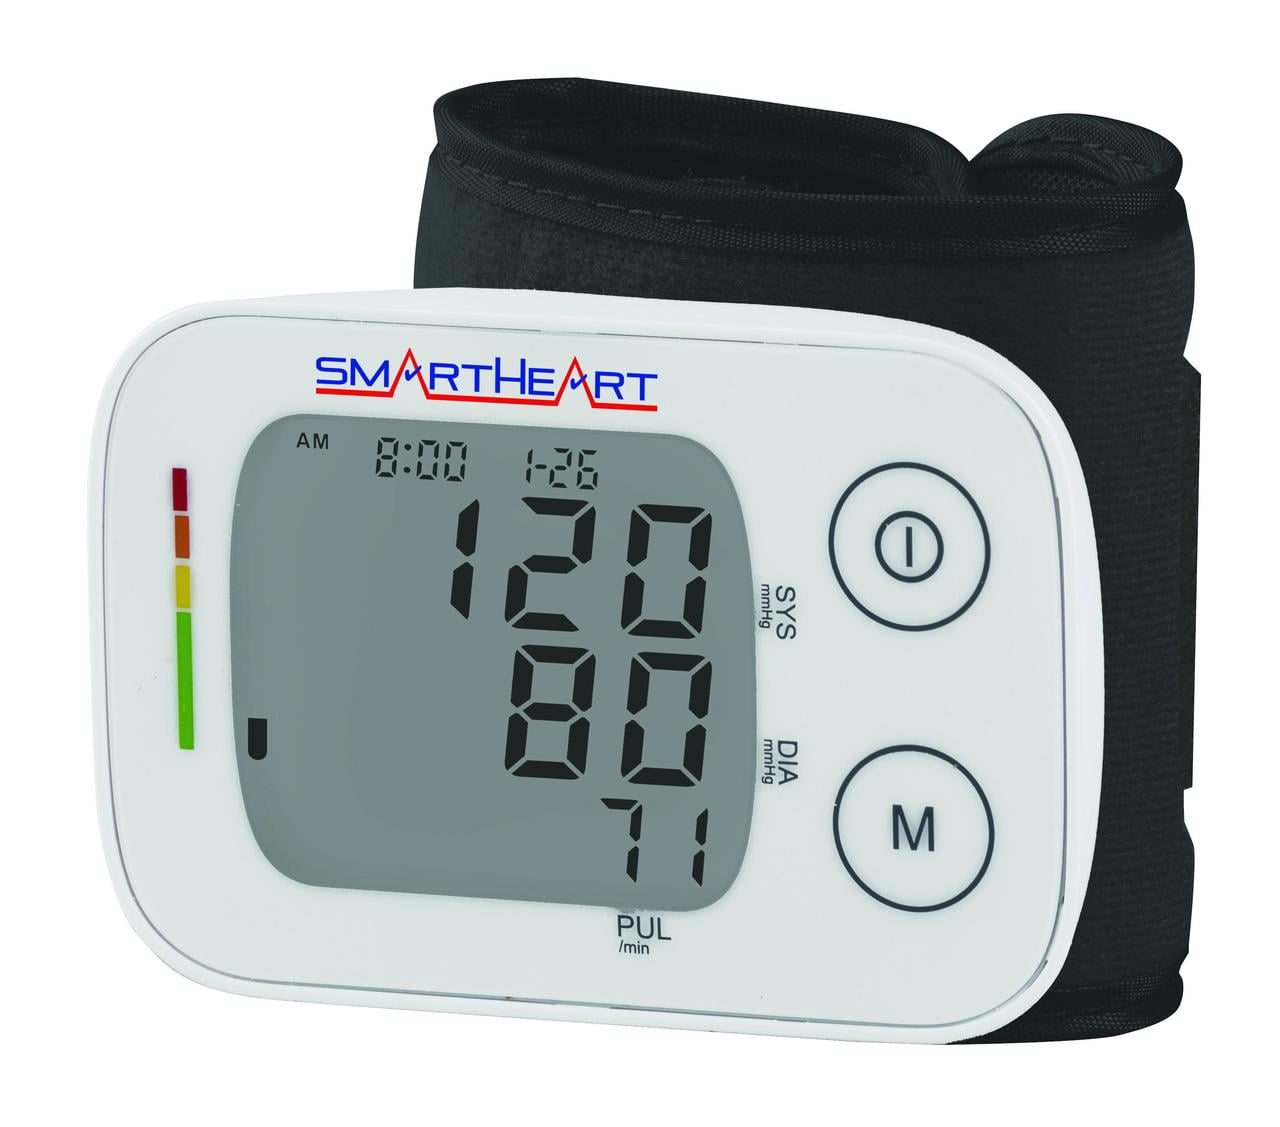  HoMedics Blood Pressure Monitor, Automatic Wrist Blood Pressure  Machine with Easy One-Touch Operation, Stores up to 30 Readings for 2  Users, Attached Blood Pressure Cuff and Storage Case Included : Health